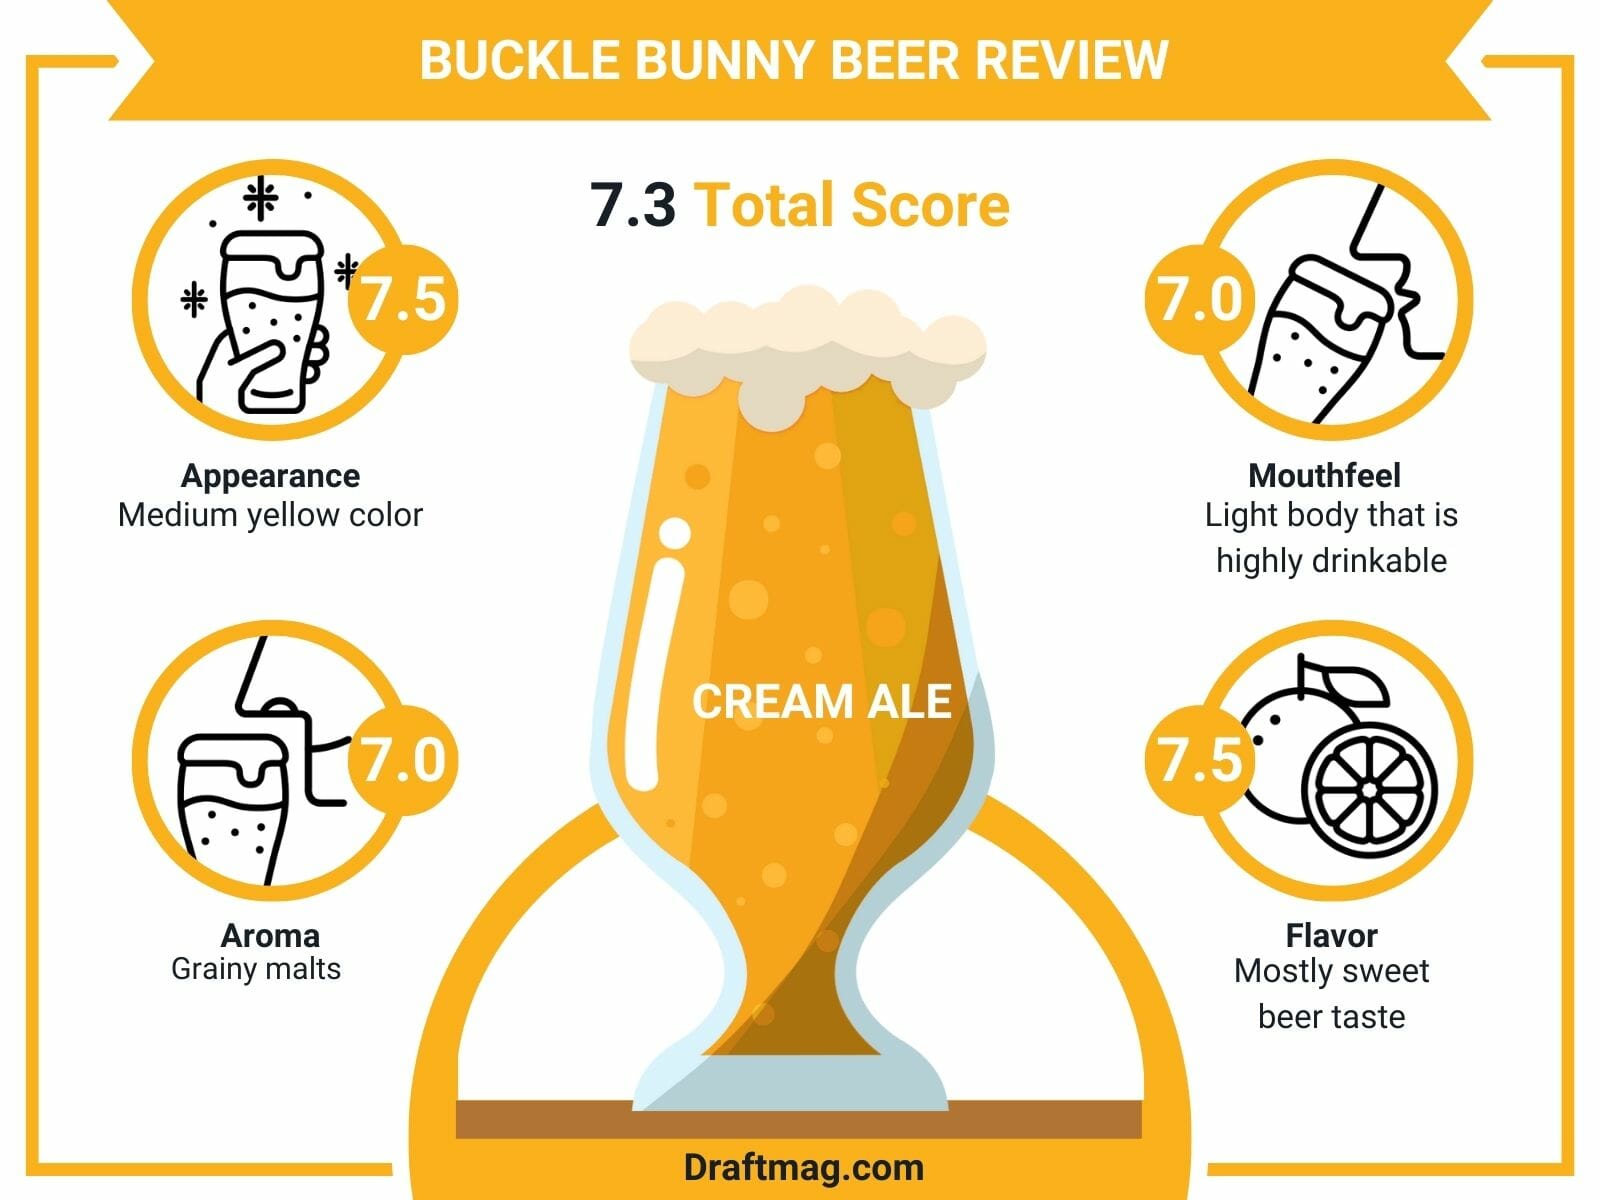 Buckle Bunny Beer Review Infographic